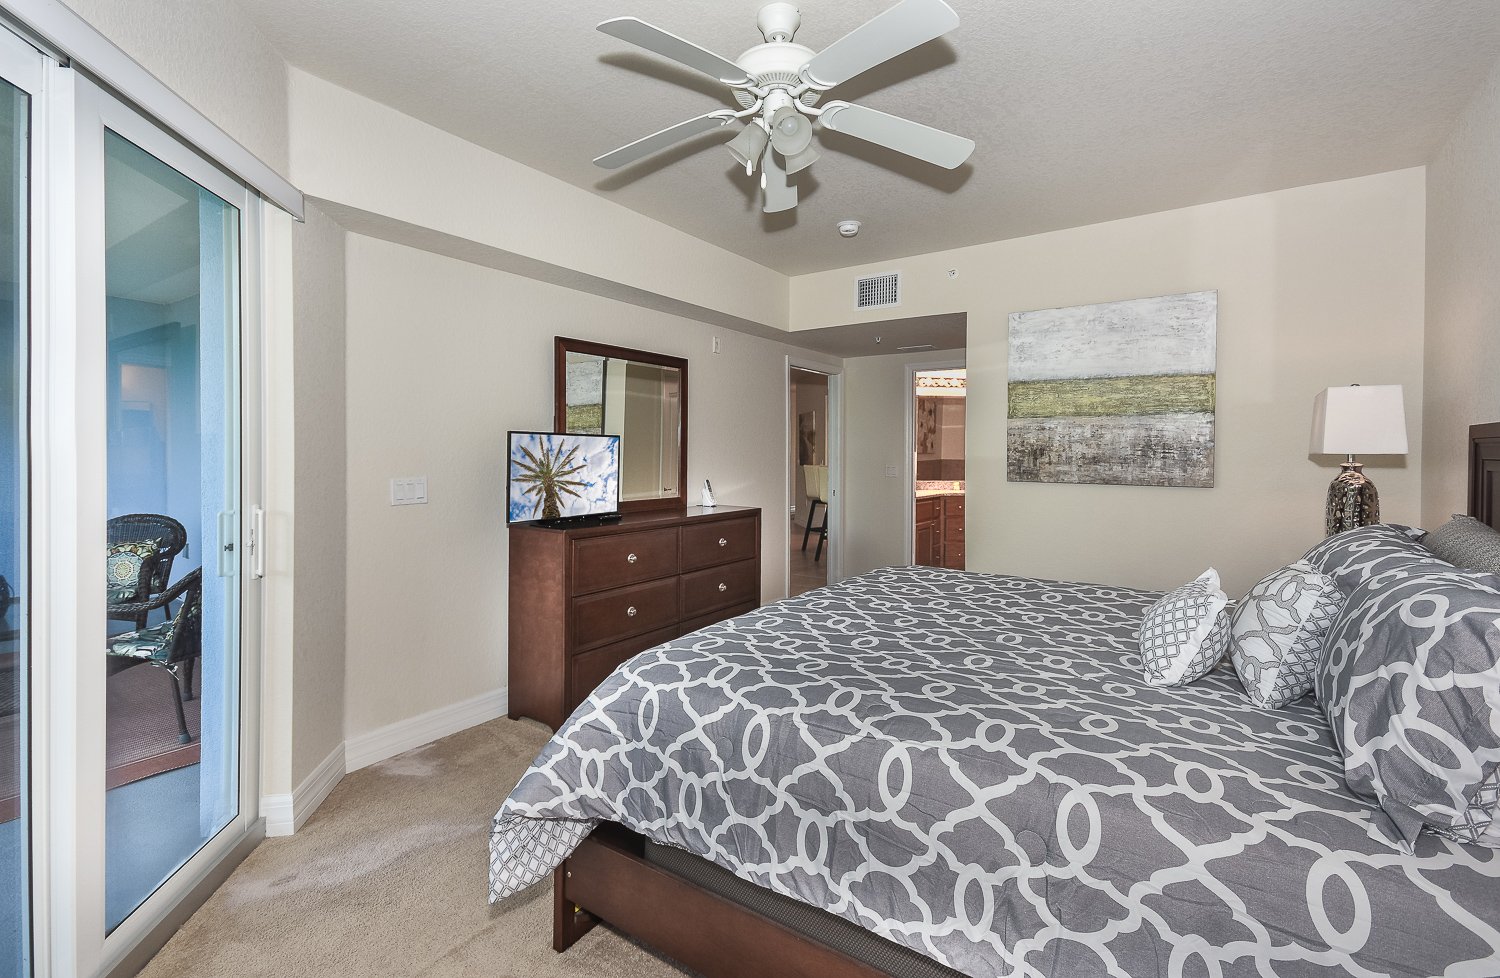 Large bed, ceiling fan, smart TV, dresser, and mirror